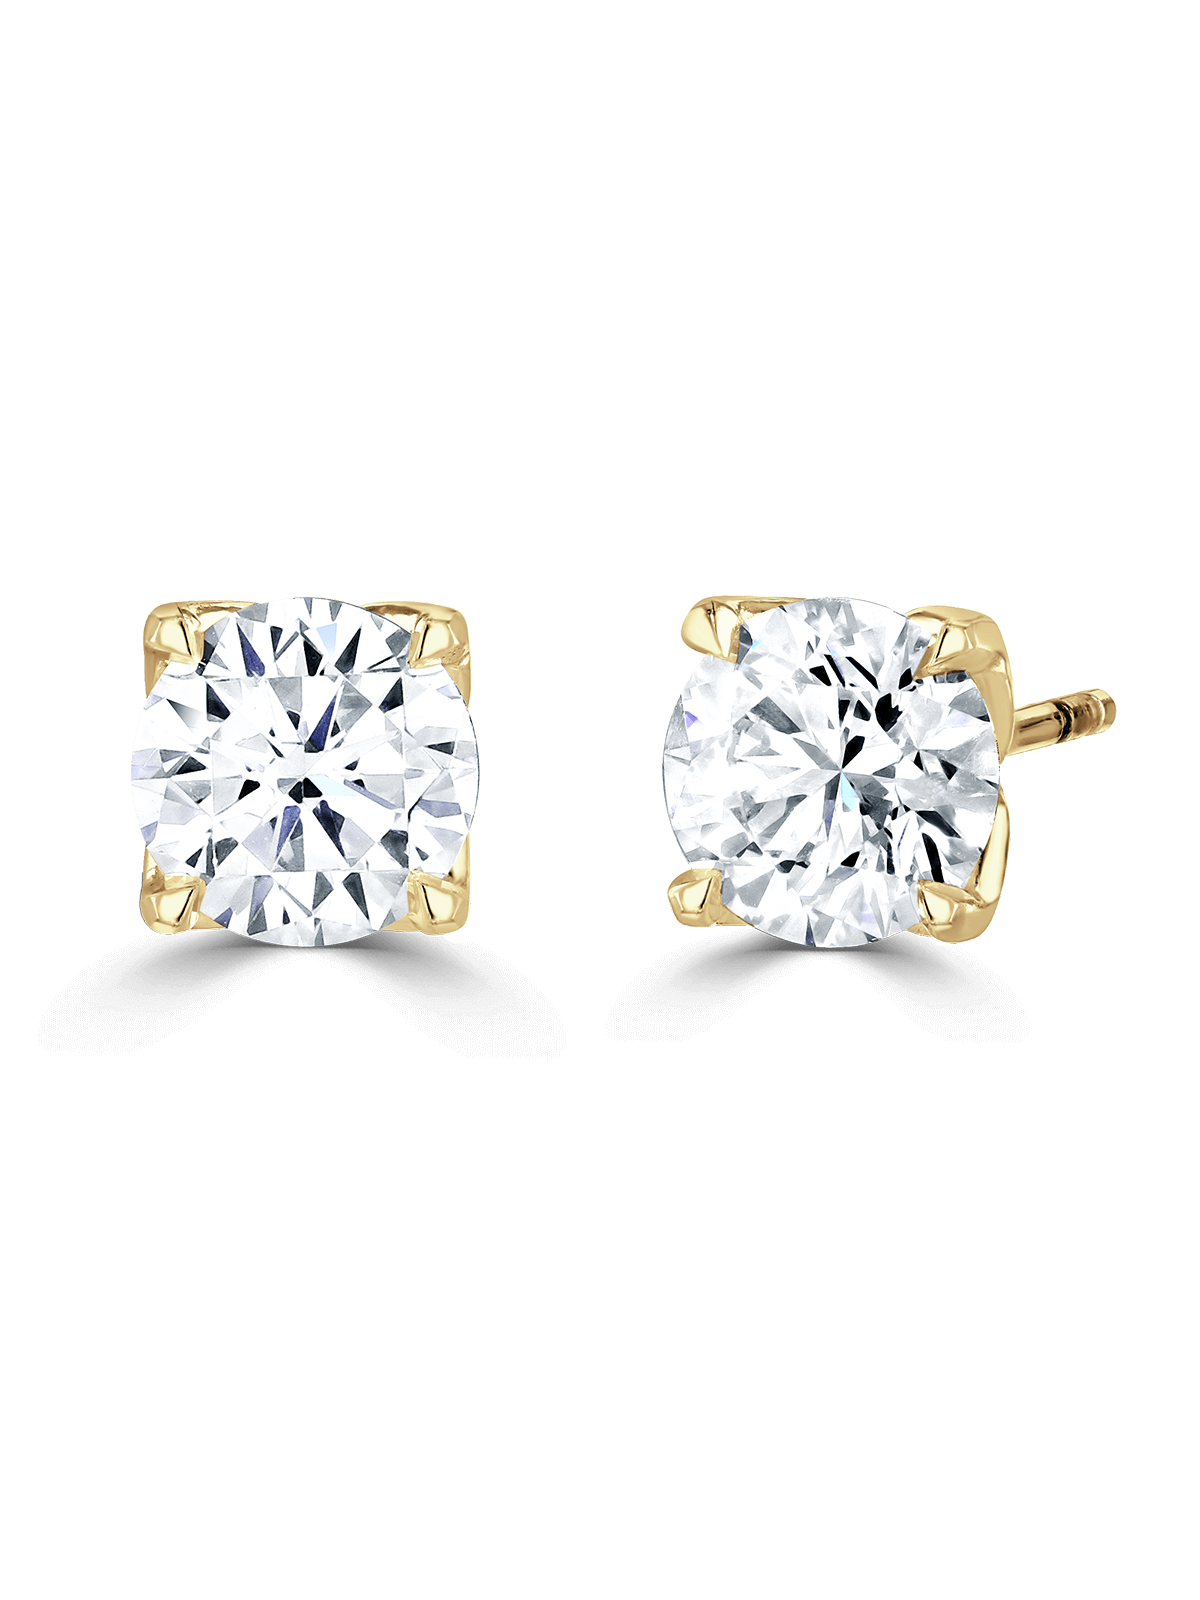 "Magnolia" Approx 2.00ct Brilliant Cut Lab Grown Diamond Solitaire Stud Earrings in 18ct Yellow Gold